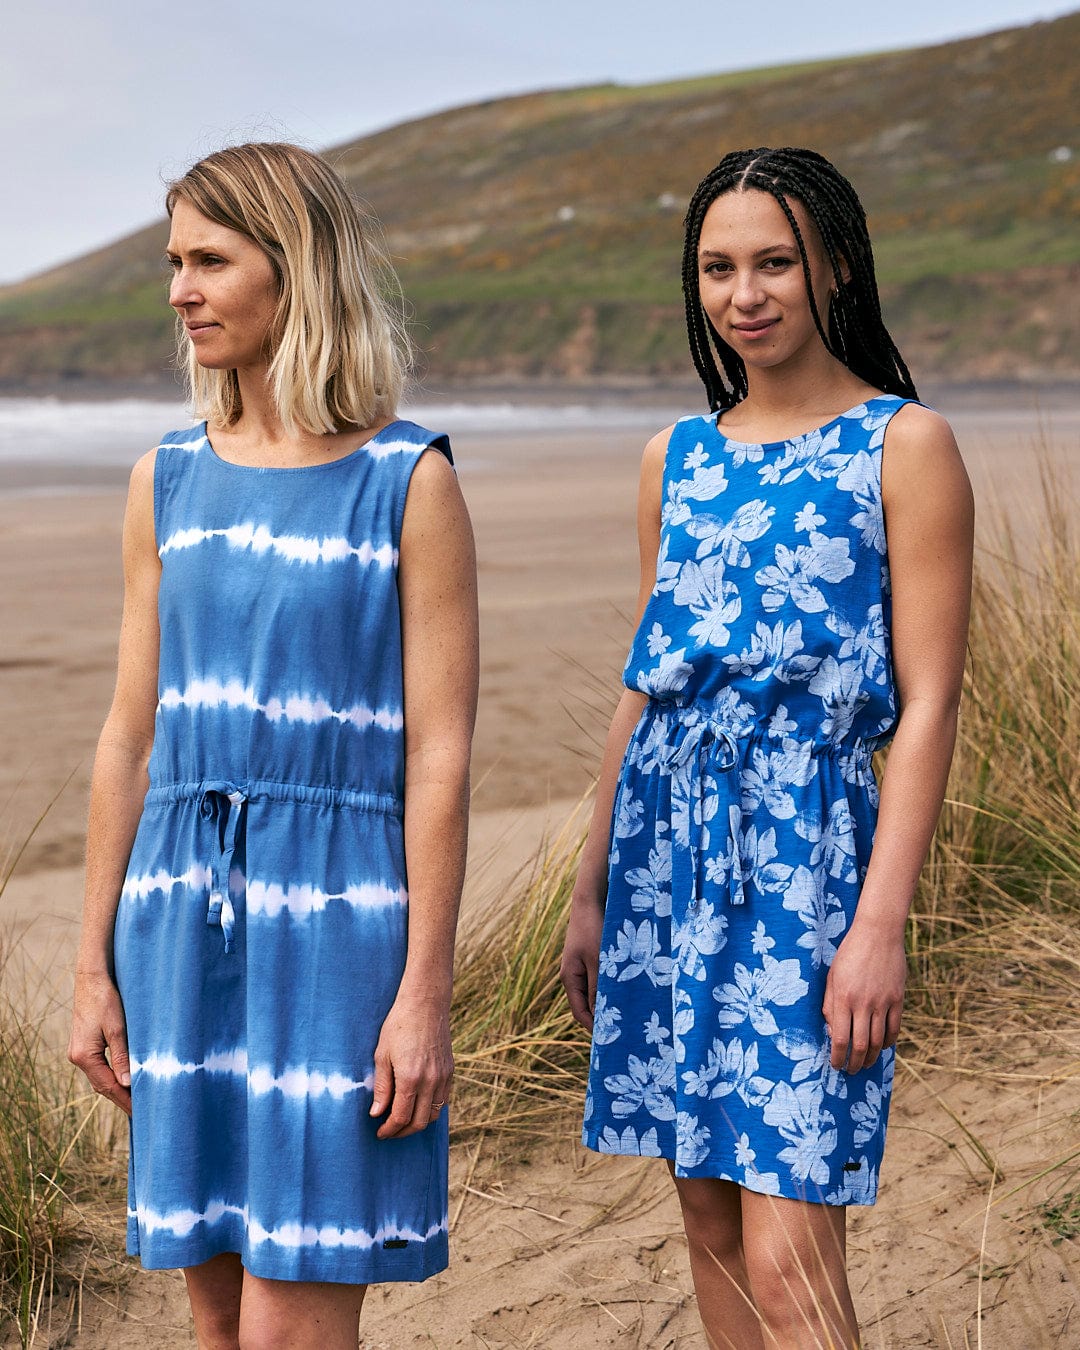 Two women standing next to each other on a beach wearing Saltrock's Floral - Womens Tie Vest Dress in Blue.